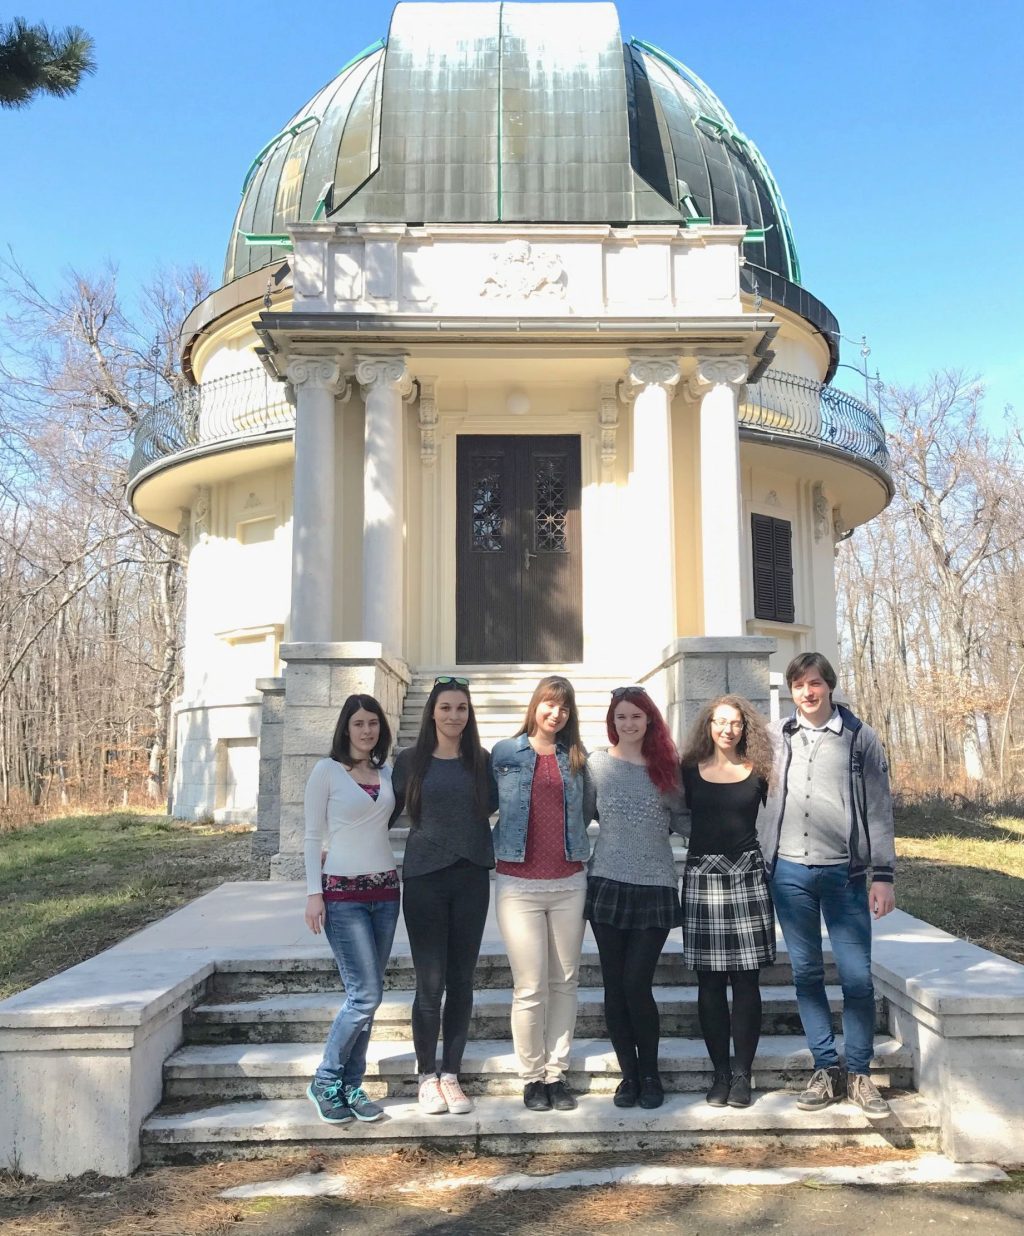 Students in research: The training program of the Astronomy Institute is five years old